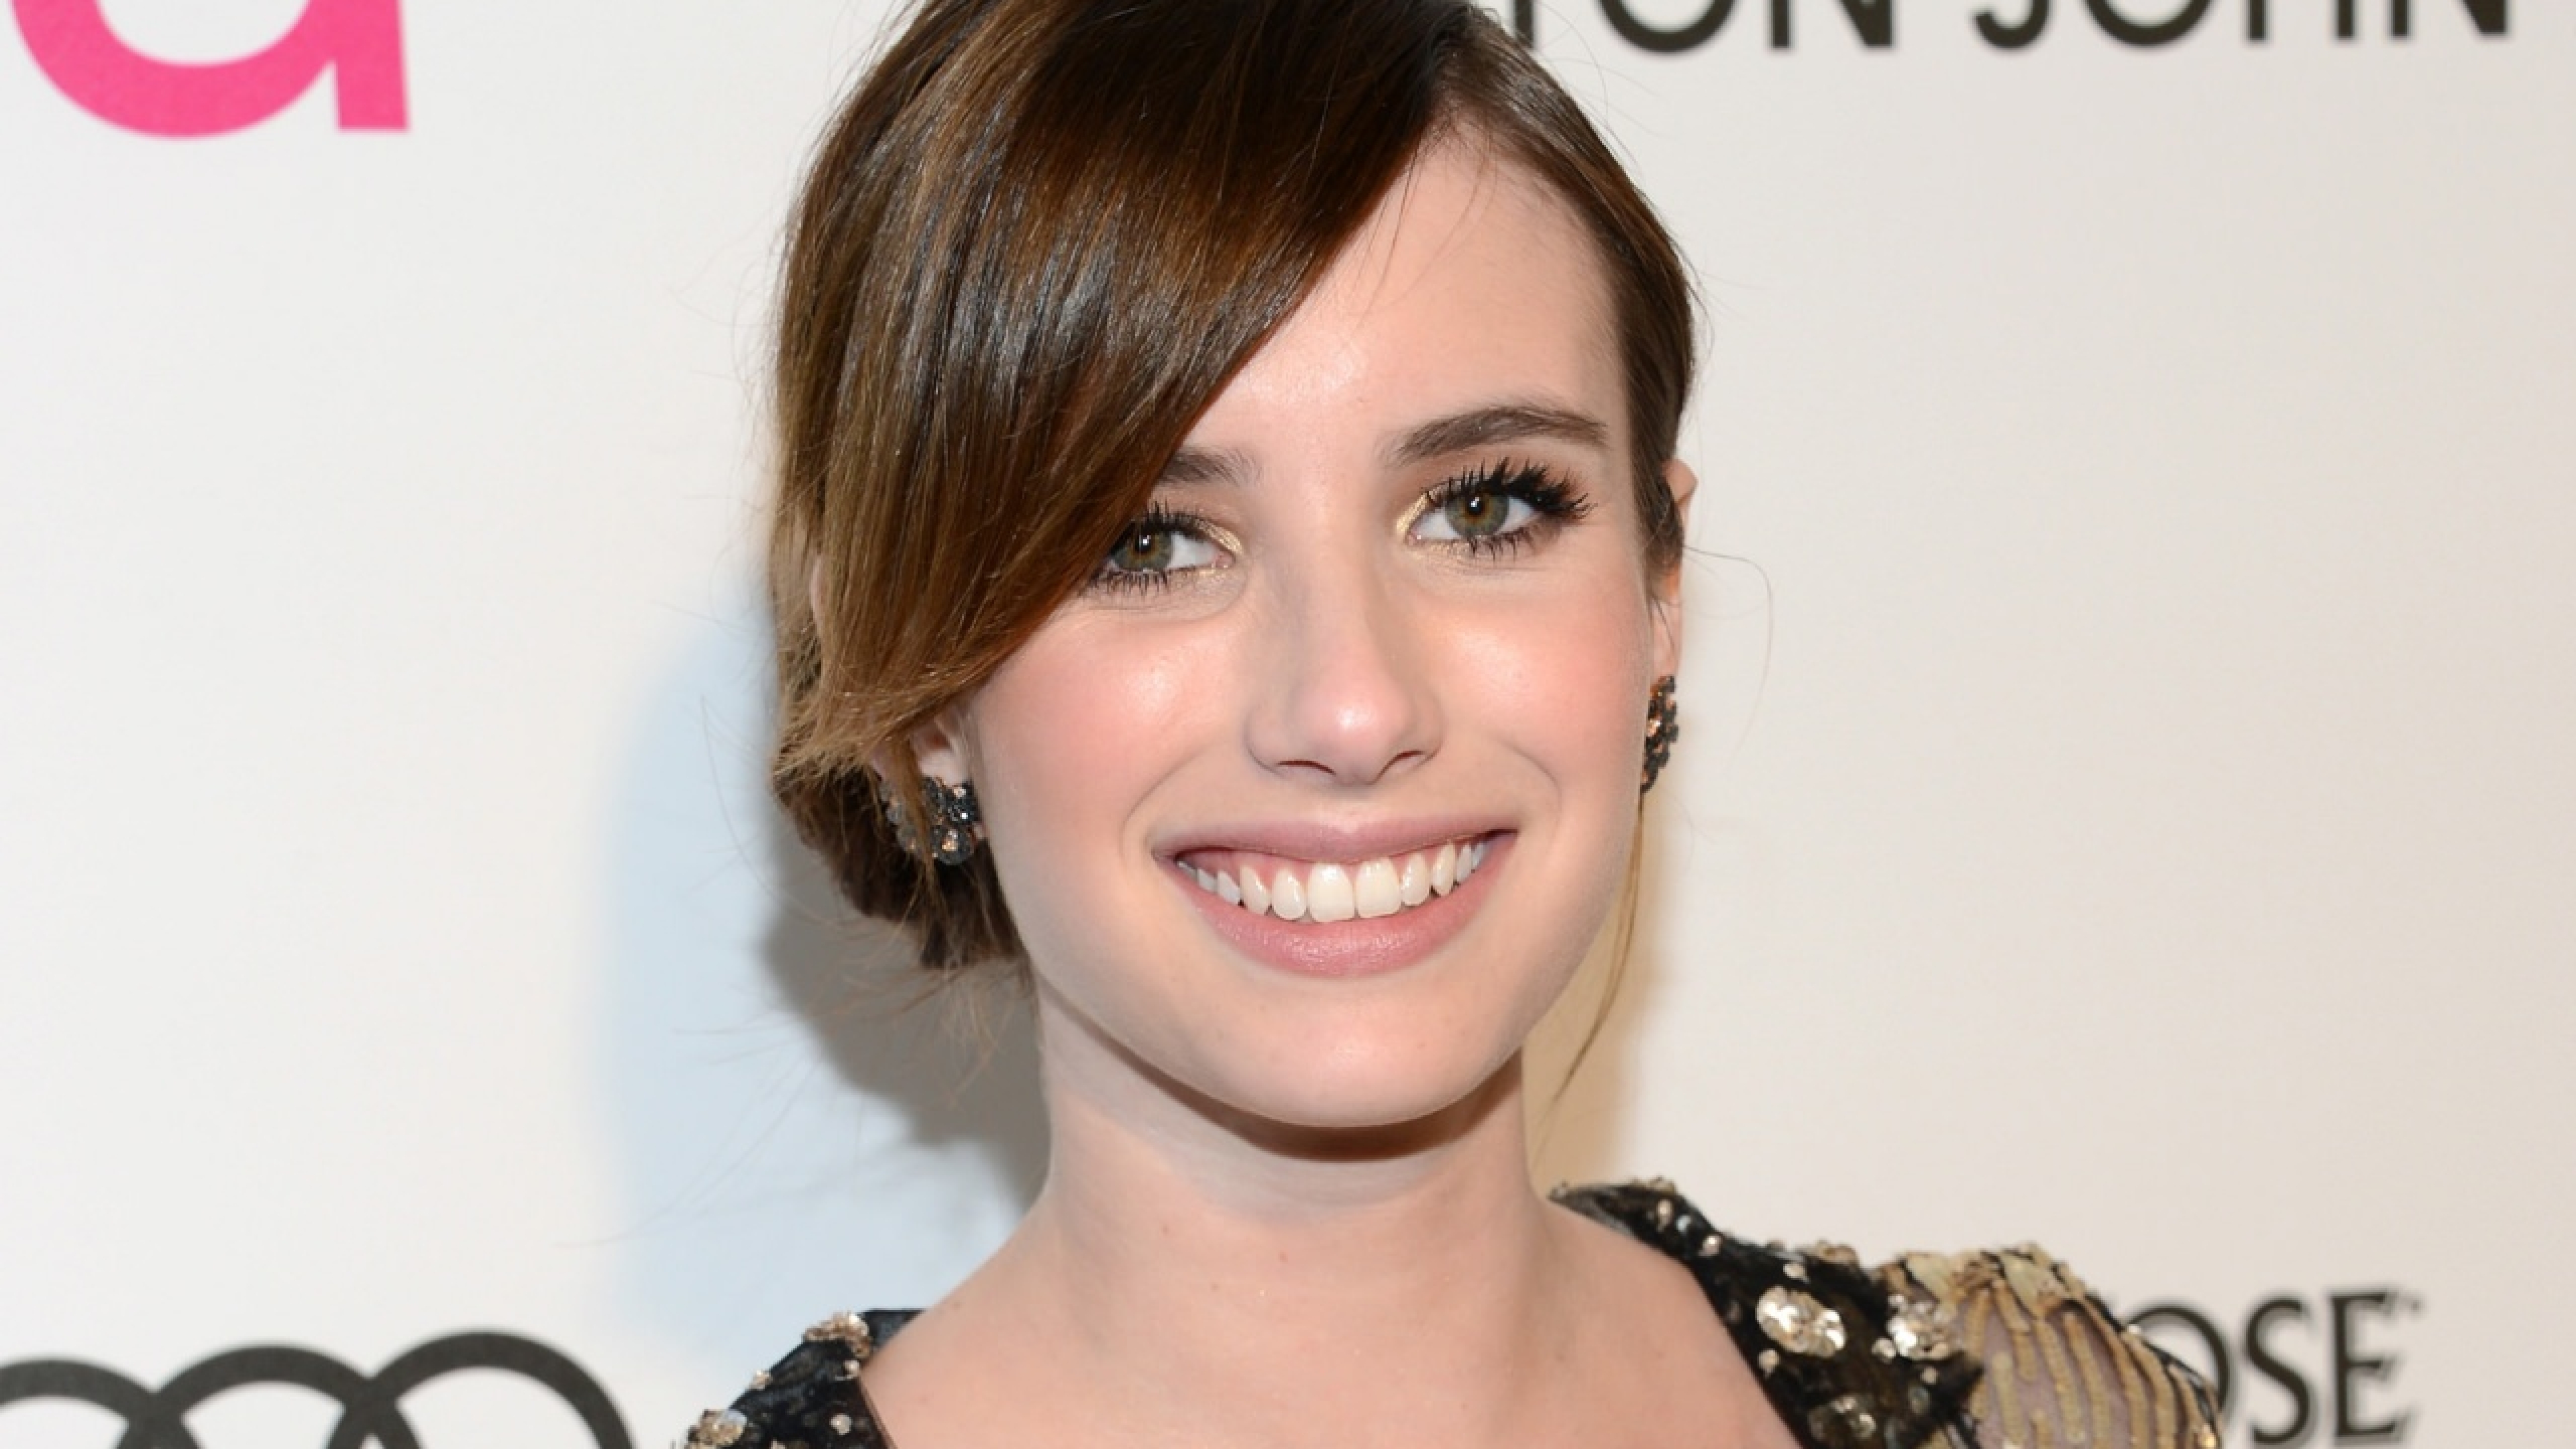 3840x2160 Emma Roberts Smile Pic 4k Wallpaper Hd Celebrities 4k Wallpapers Images Photos And